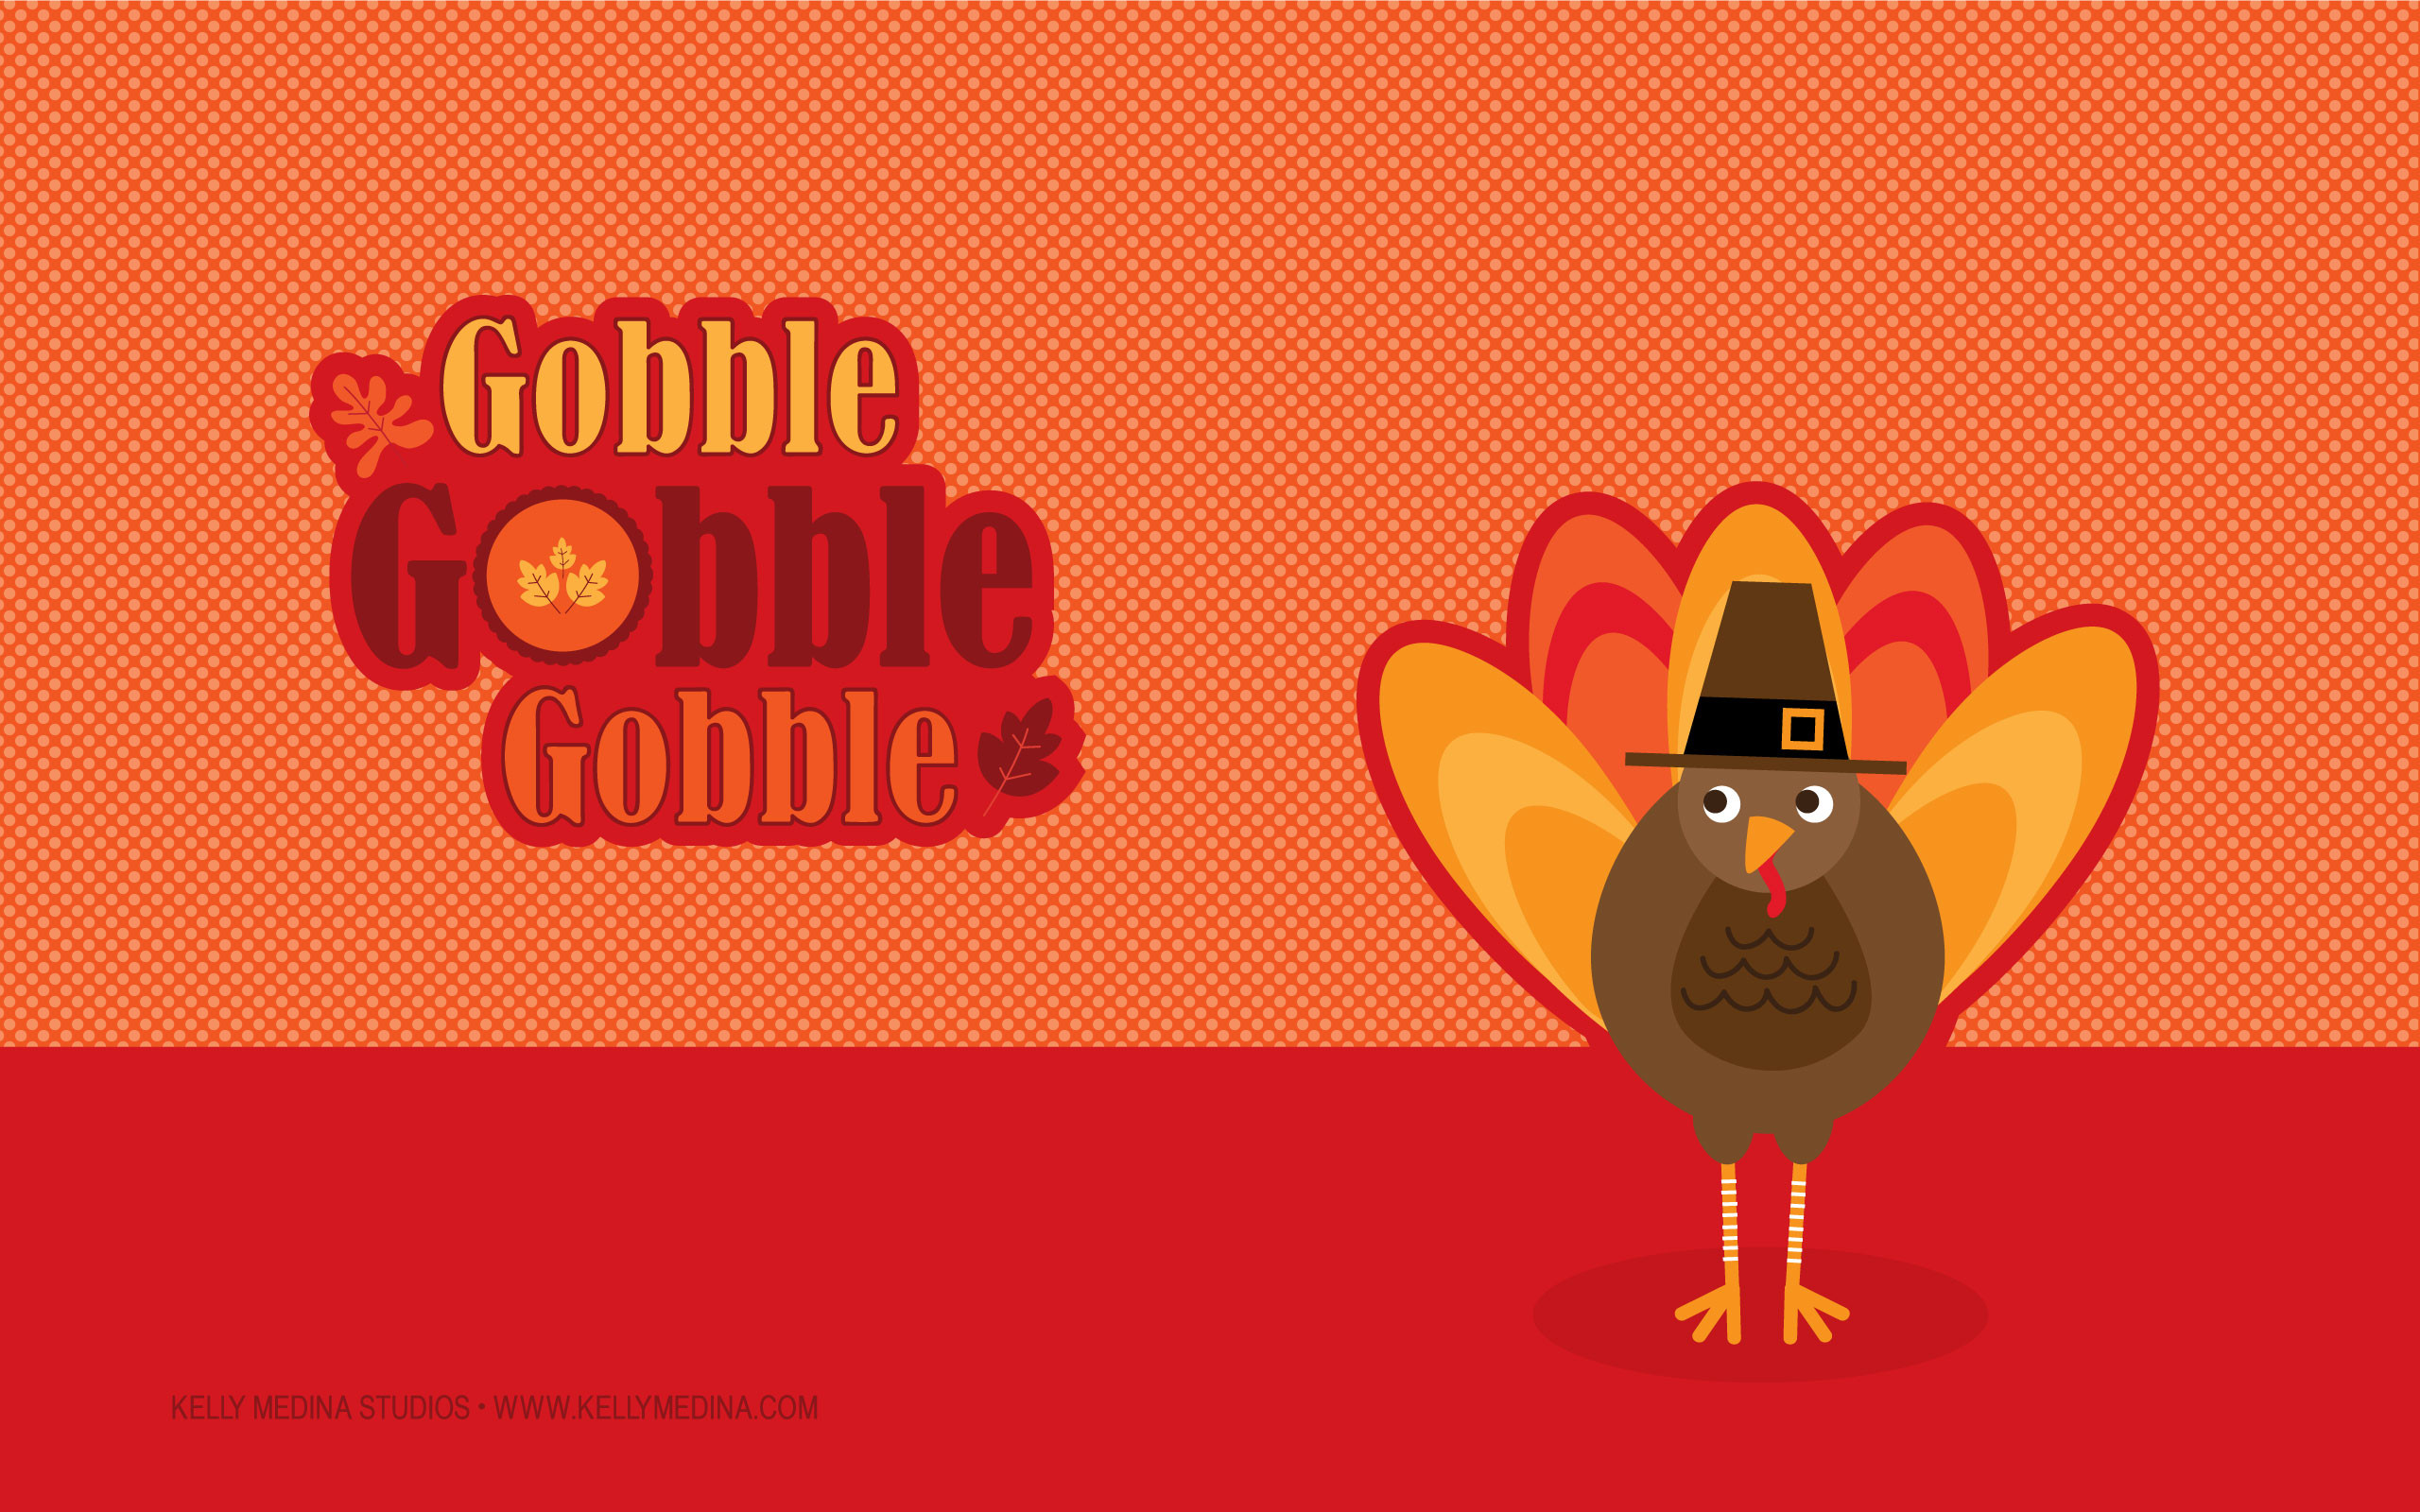 2560x1600 ... Thanksgiving Turkey^] HD Images & Wallpapers for Pinterest .